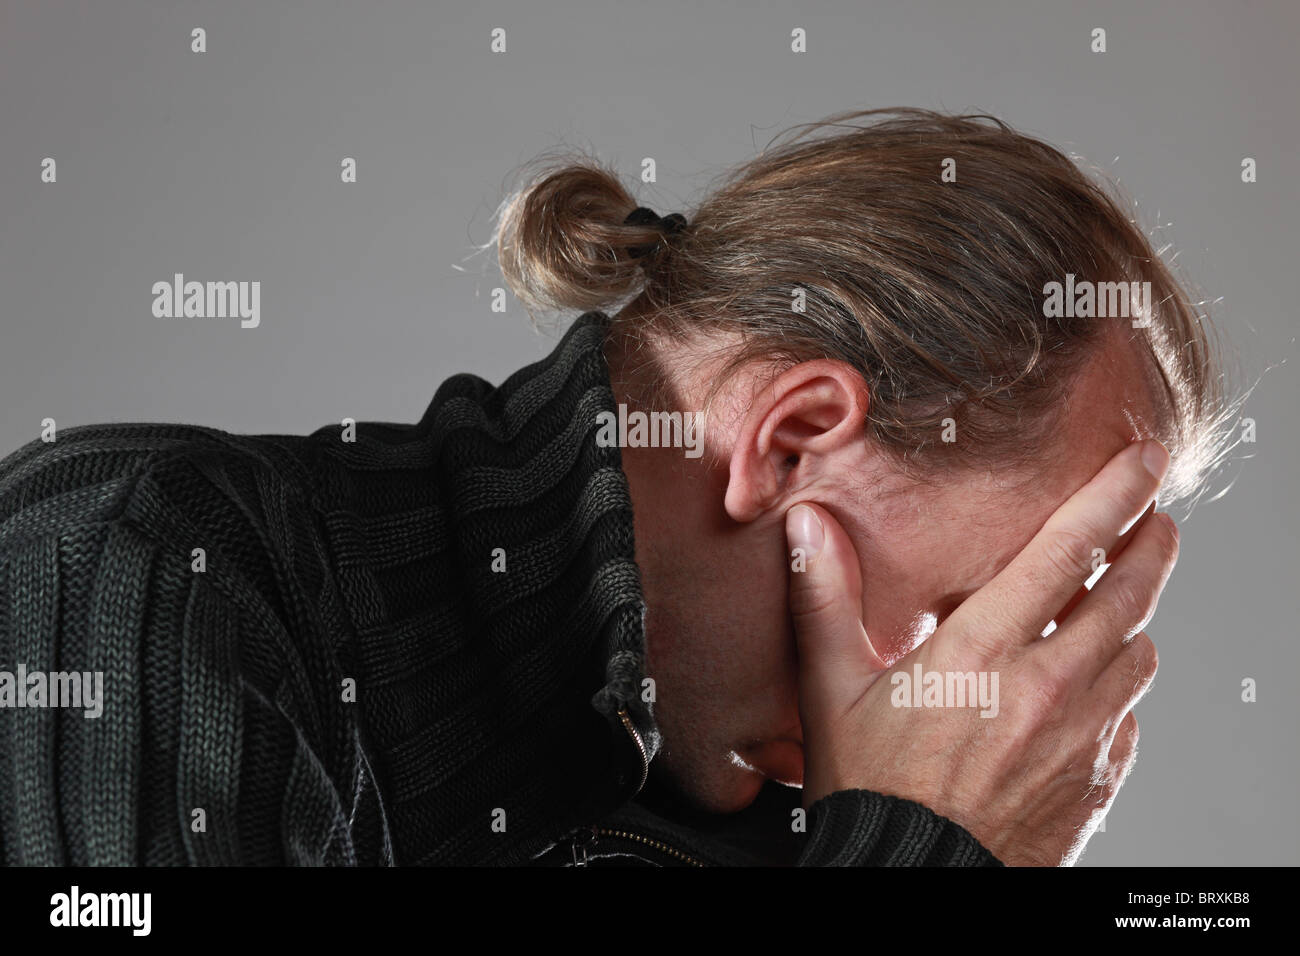 The thoughtful man anxious by problems. Stock Photo